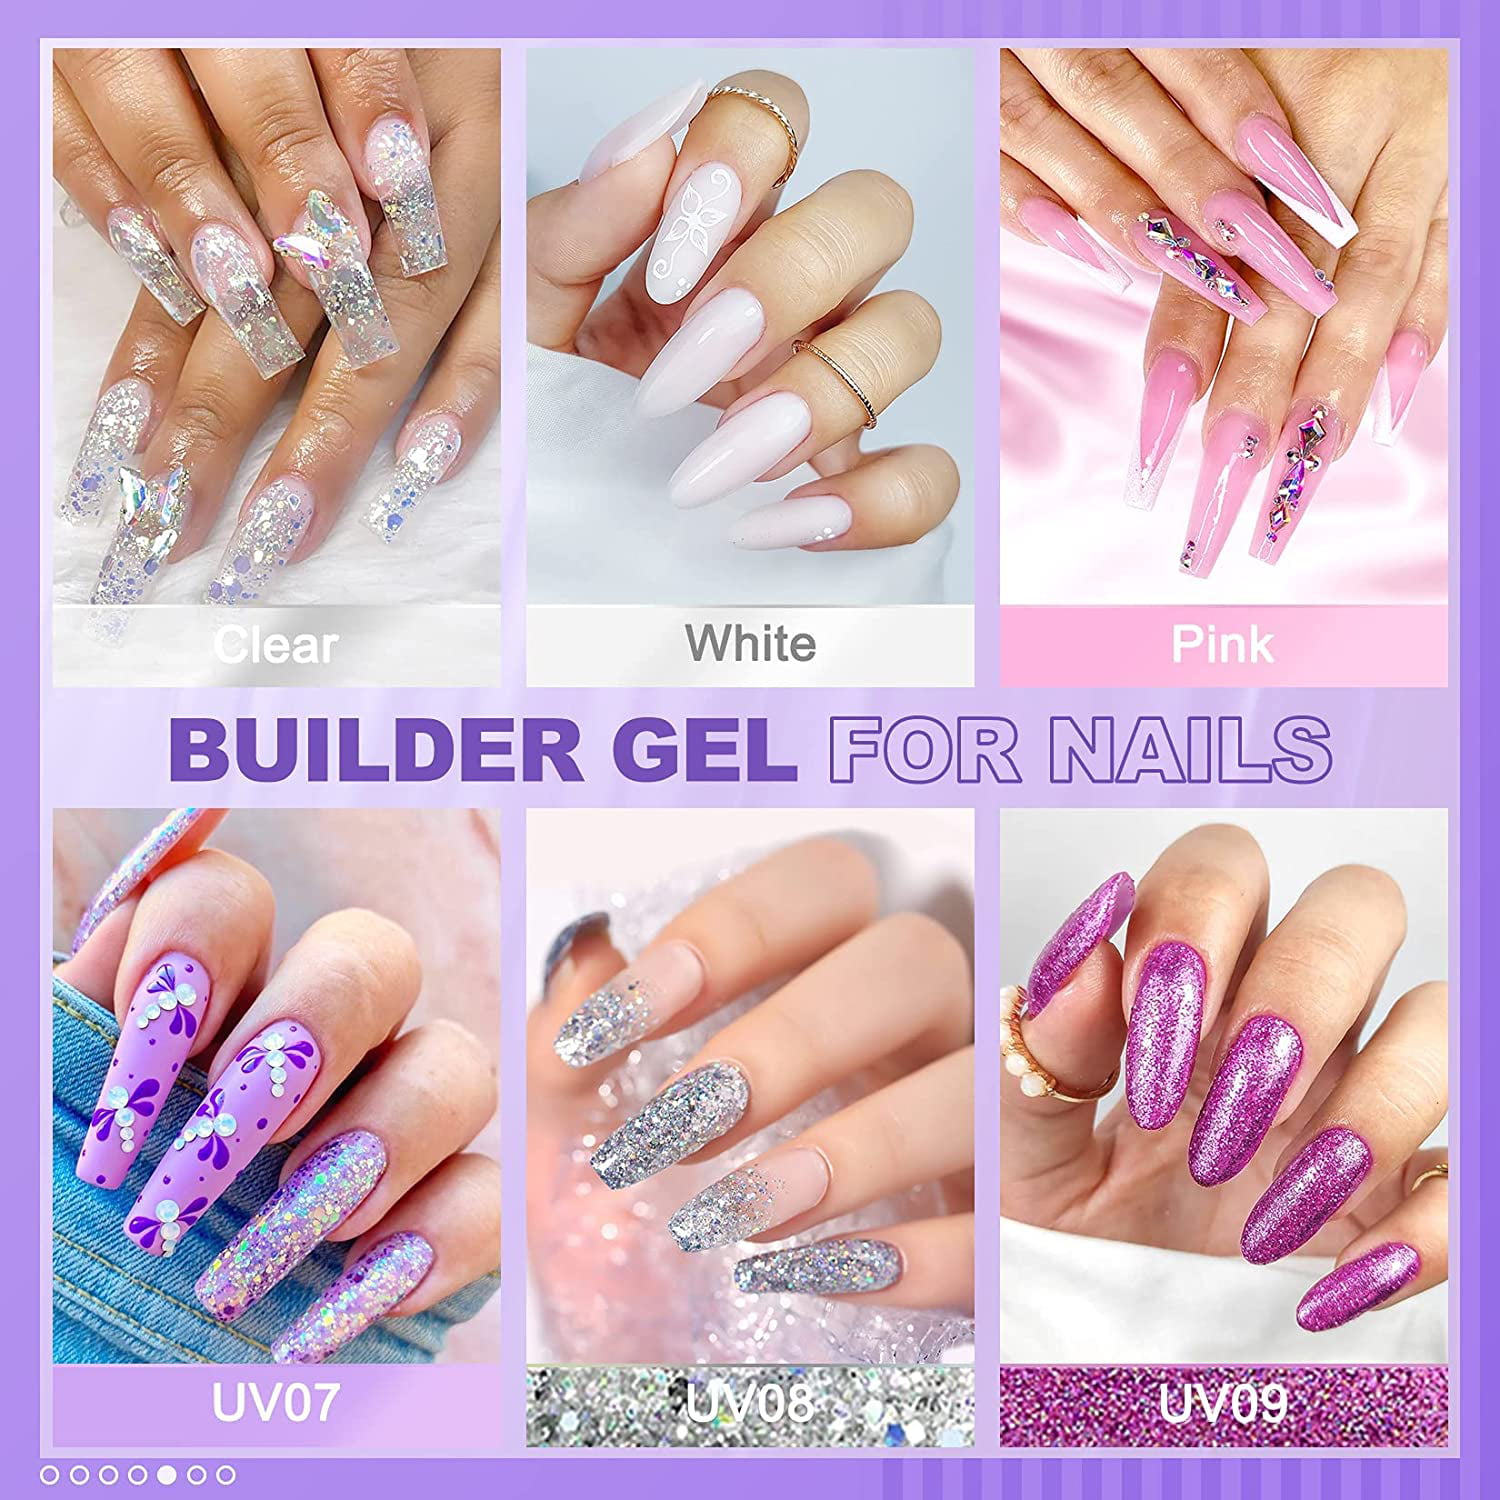 Amazon.com: Bellavena Builder Gel for Nails 15ML Builder in a Bottle  Premium Quality Gel Builder for Nails Salon Quality Builder Gel in a bottle  Easy To Use Shipped from USA Clear Builder